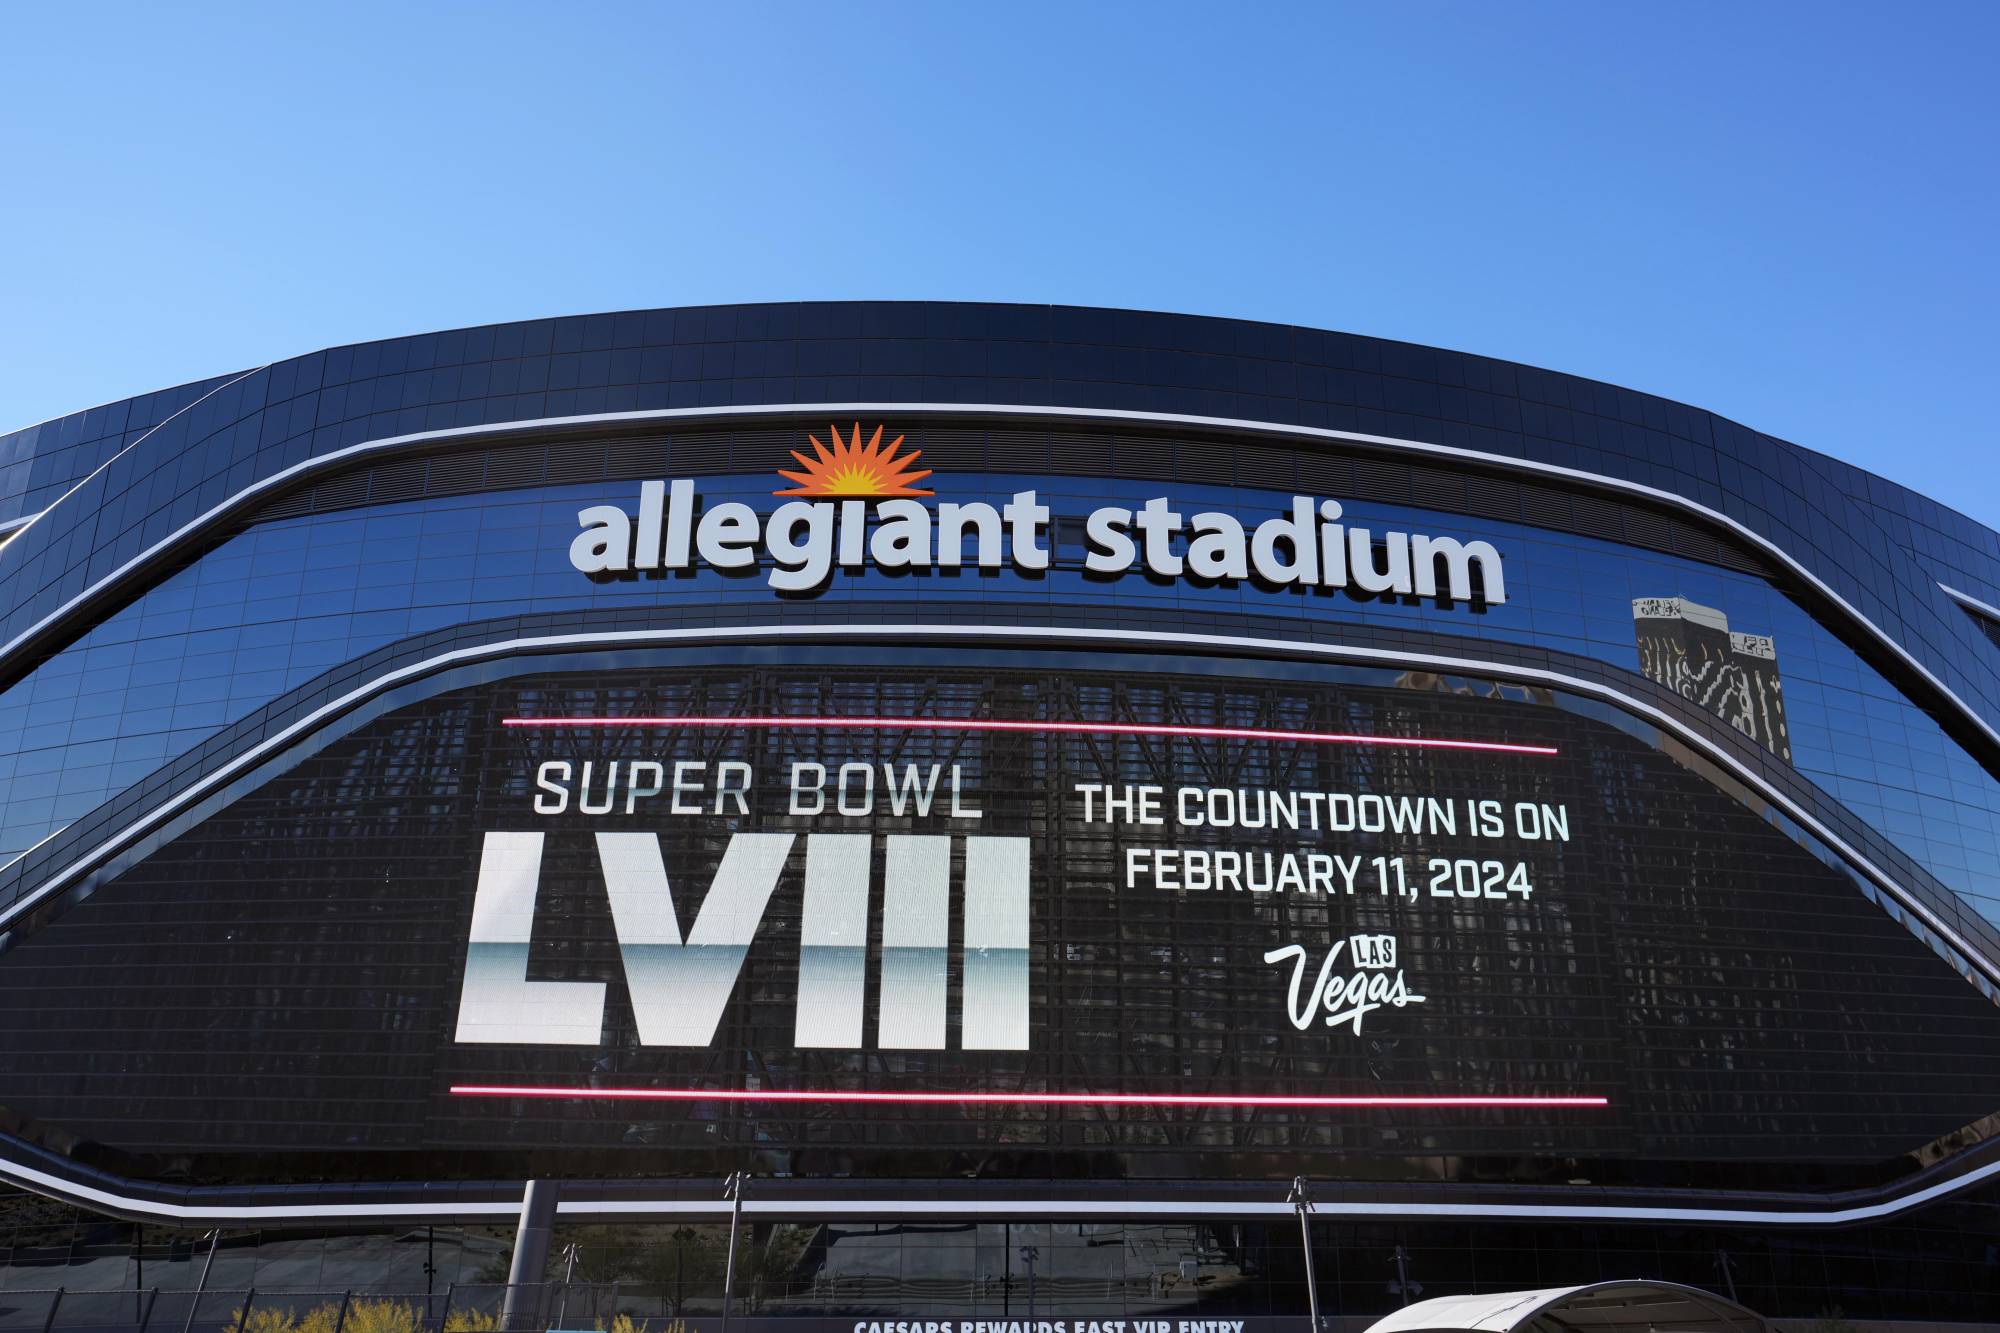 Las Vegas betting reputation as party capital on Super Bowl - The